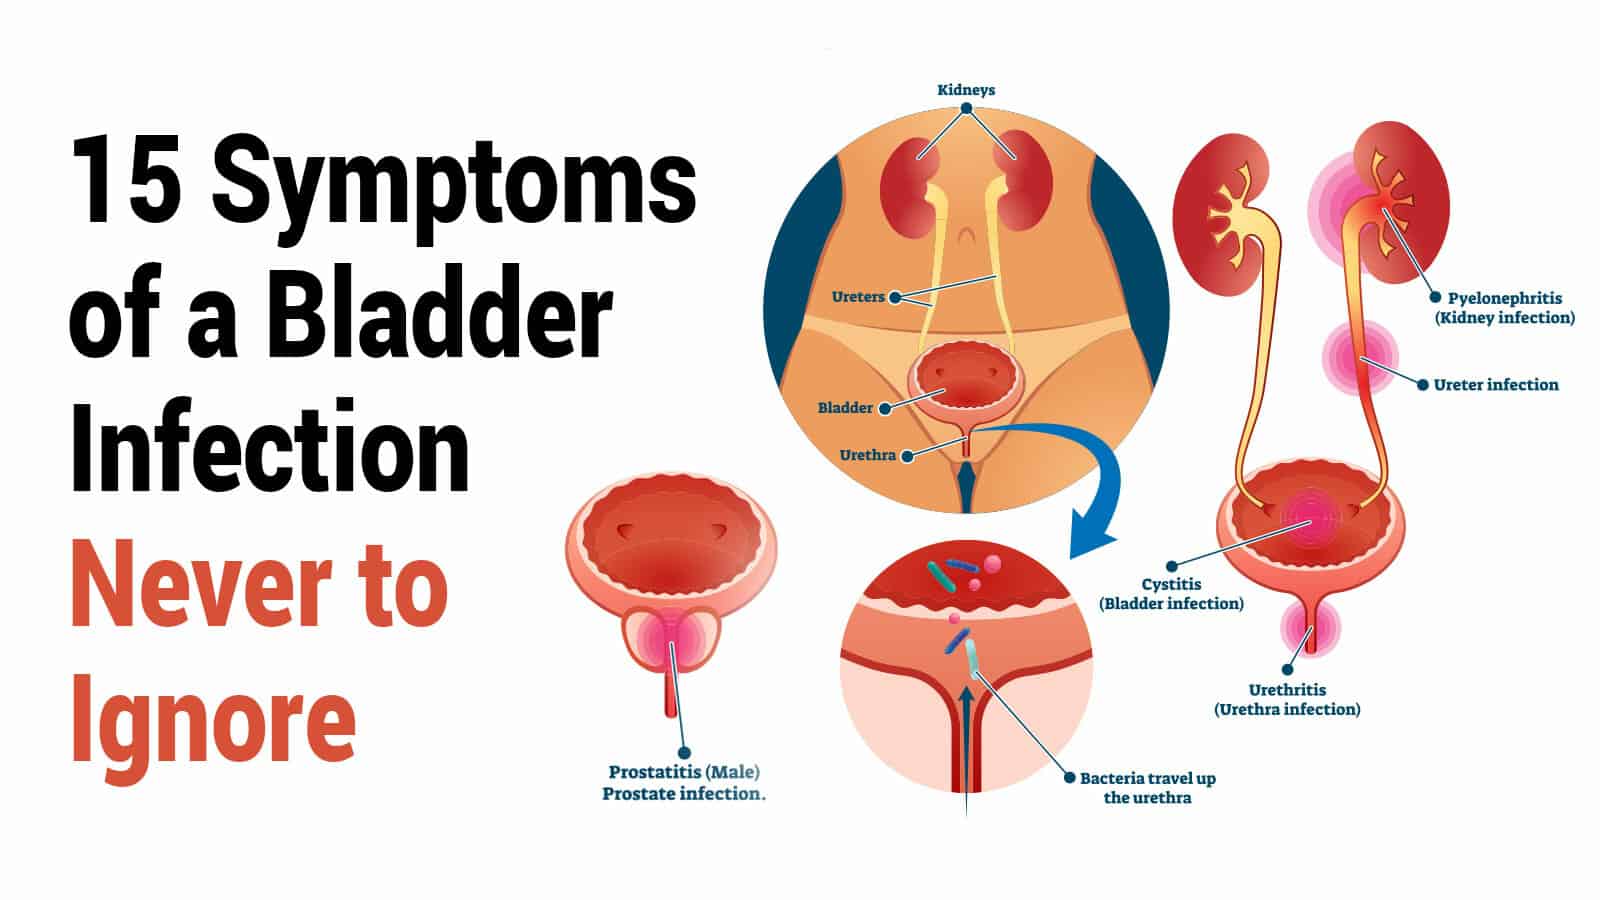 15 of Symptoms of a Bladder Infection Never to Ignore